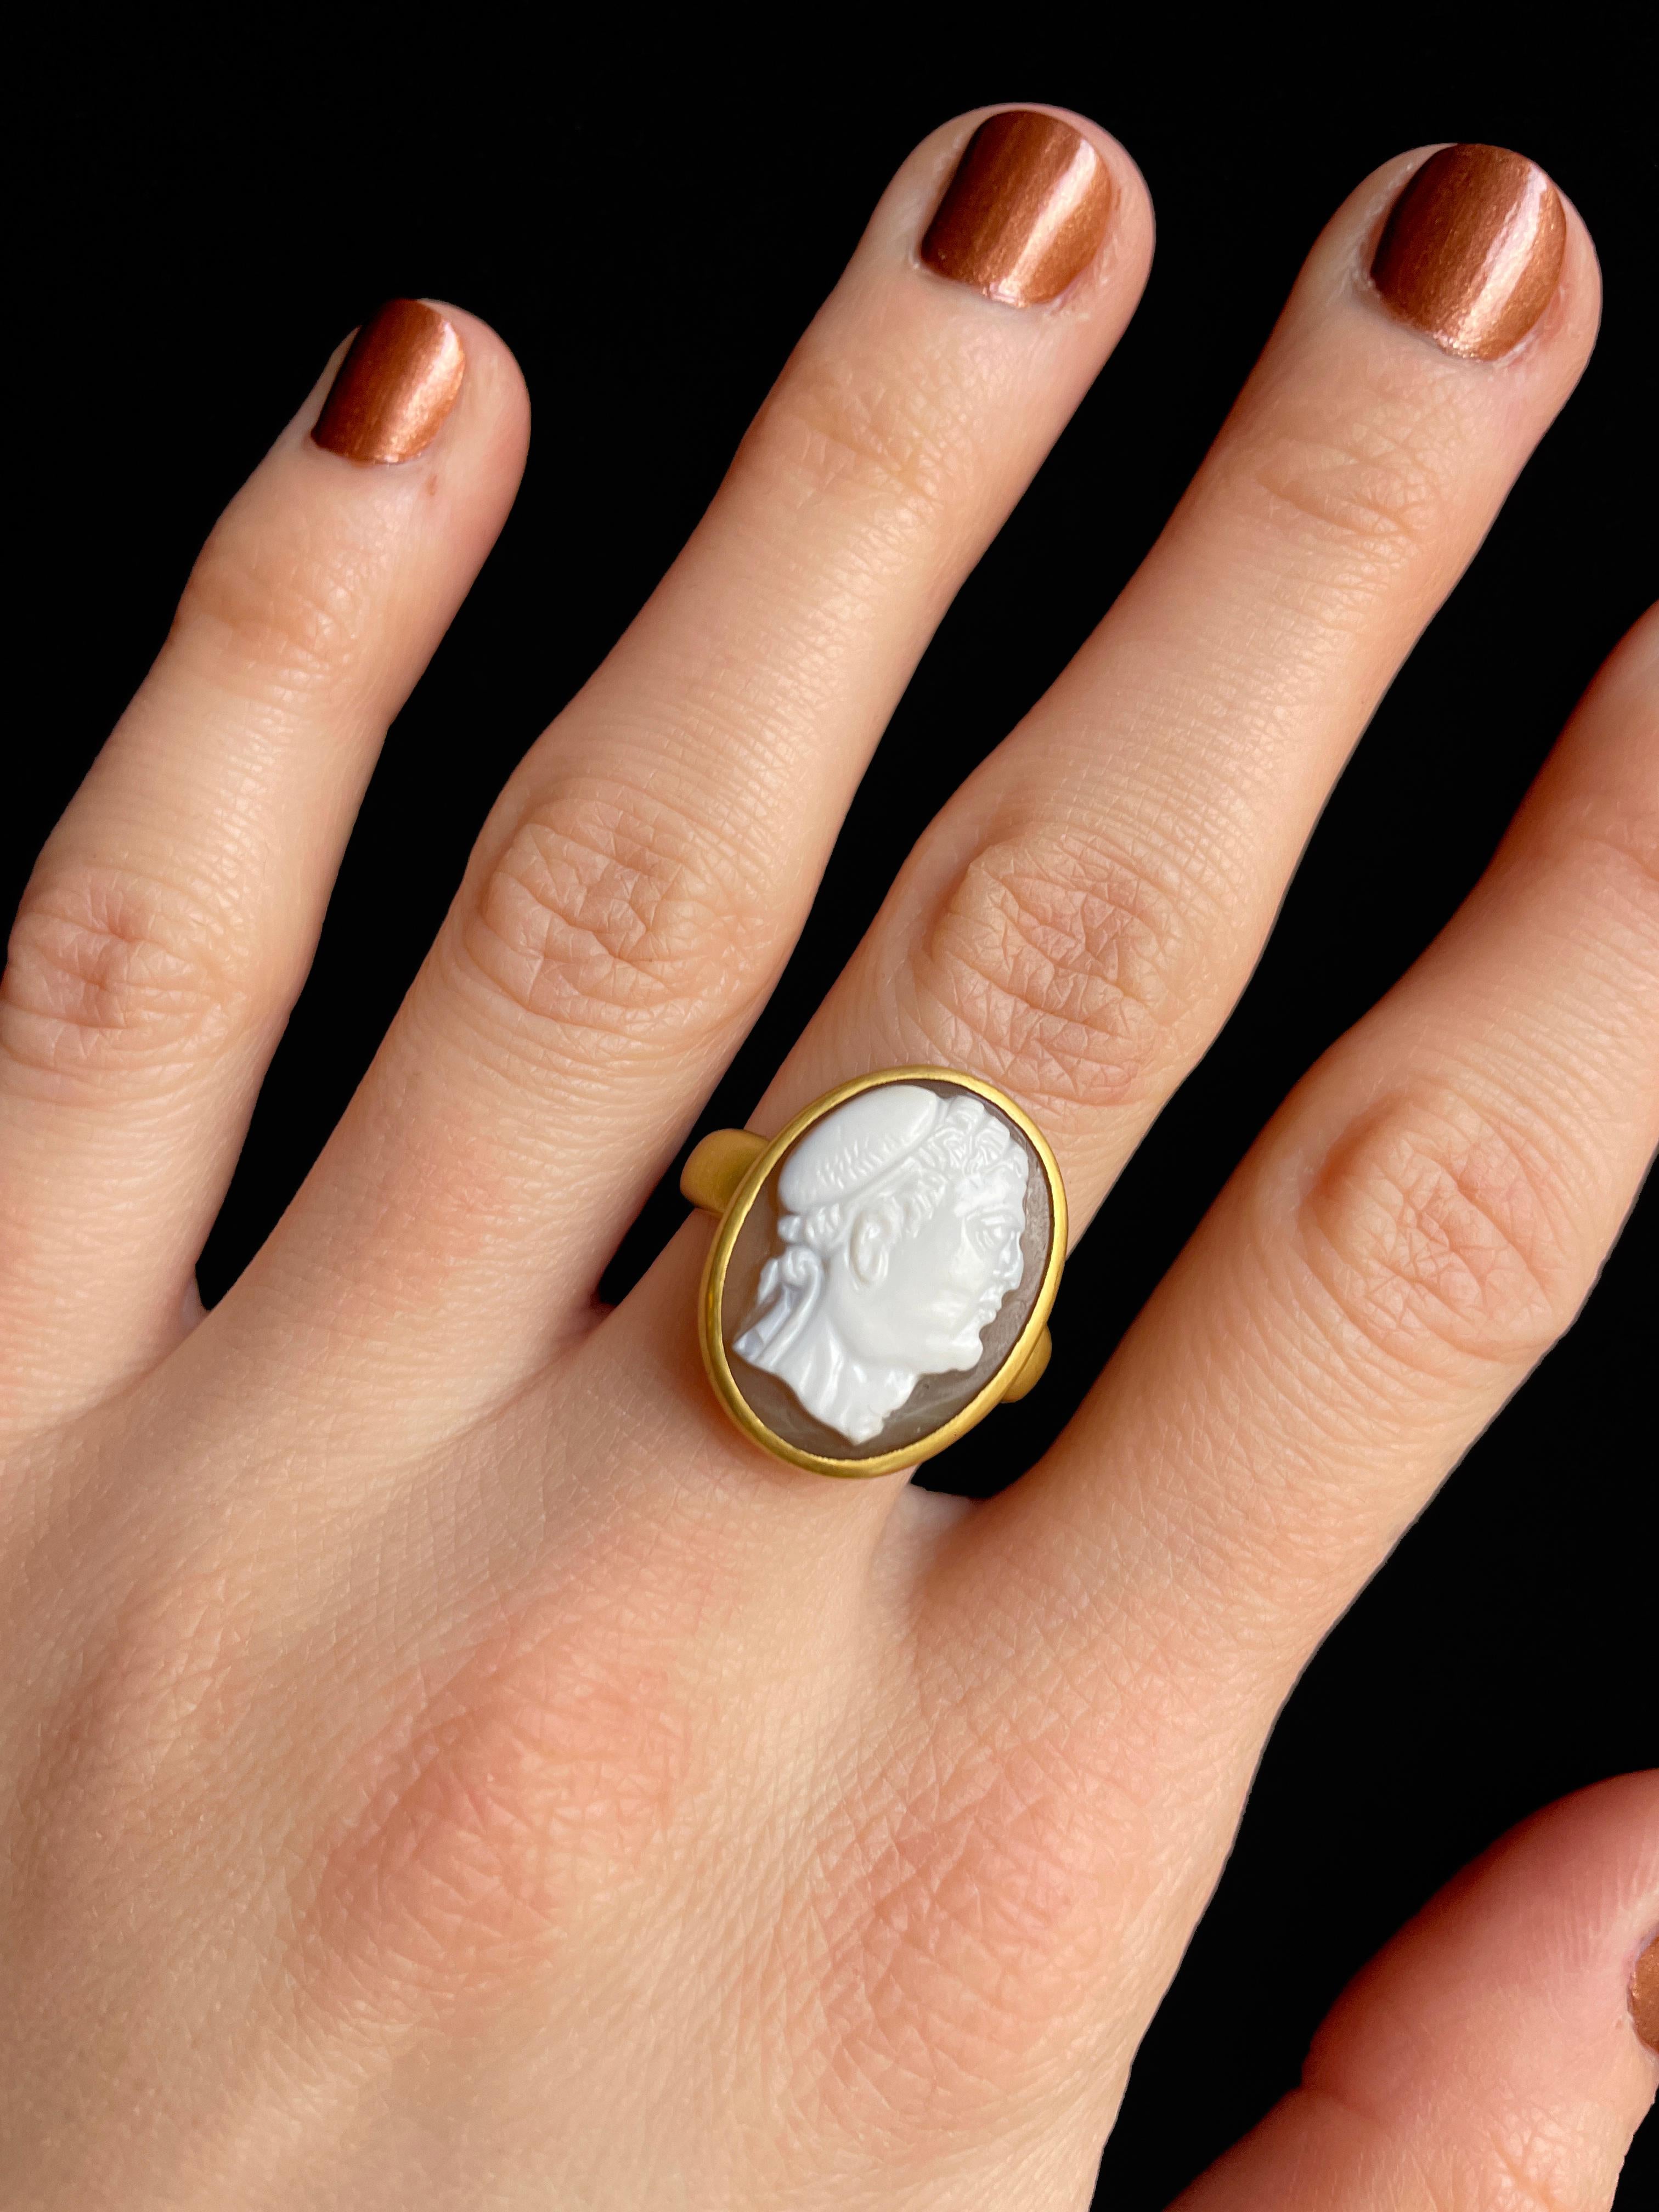 Renaissance Cameo Ring of Galba in a Modern Gold Setting In Good Condition For Sale In Chicago, IL